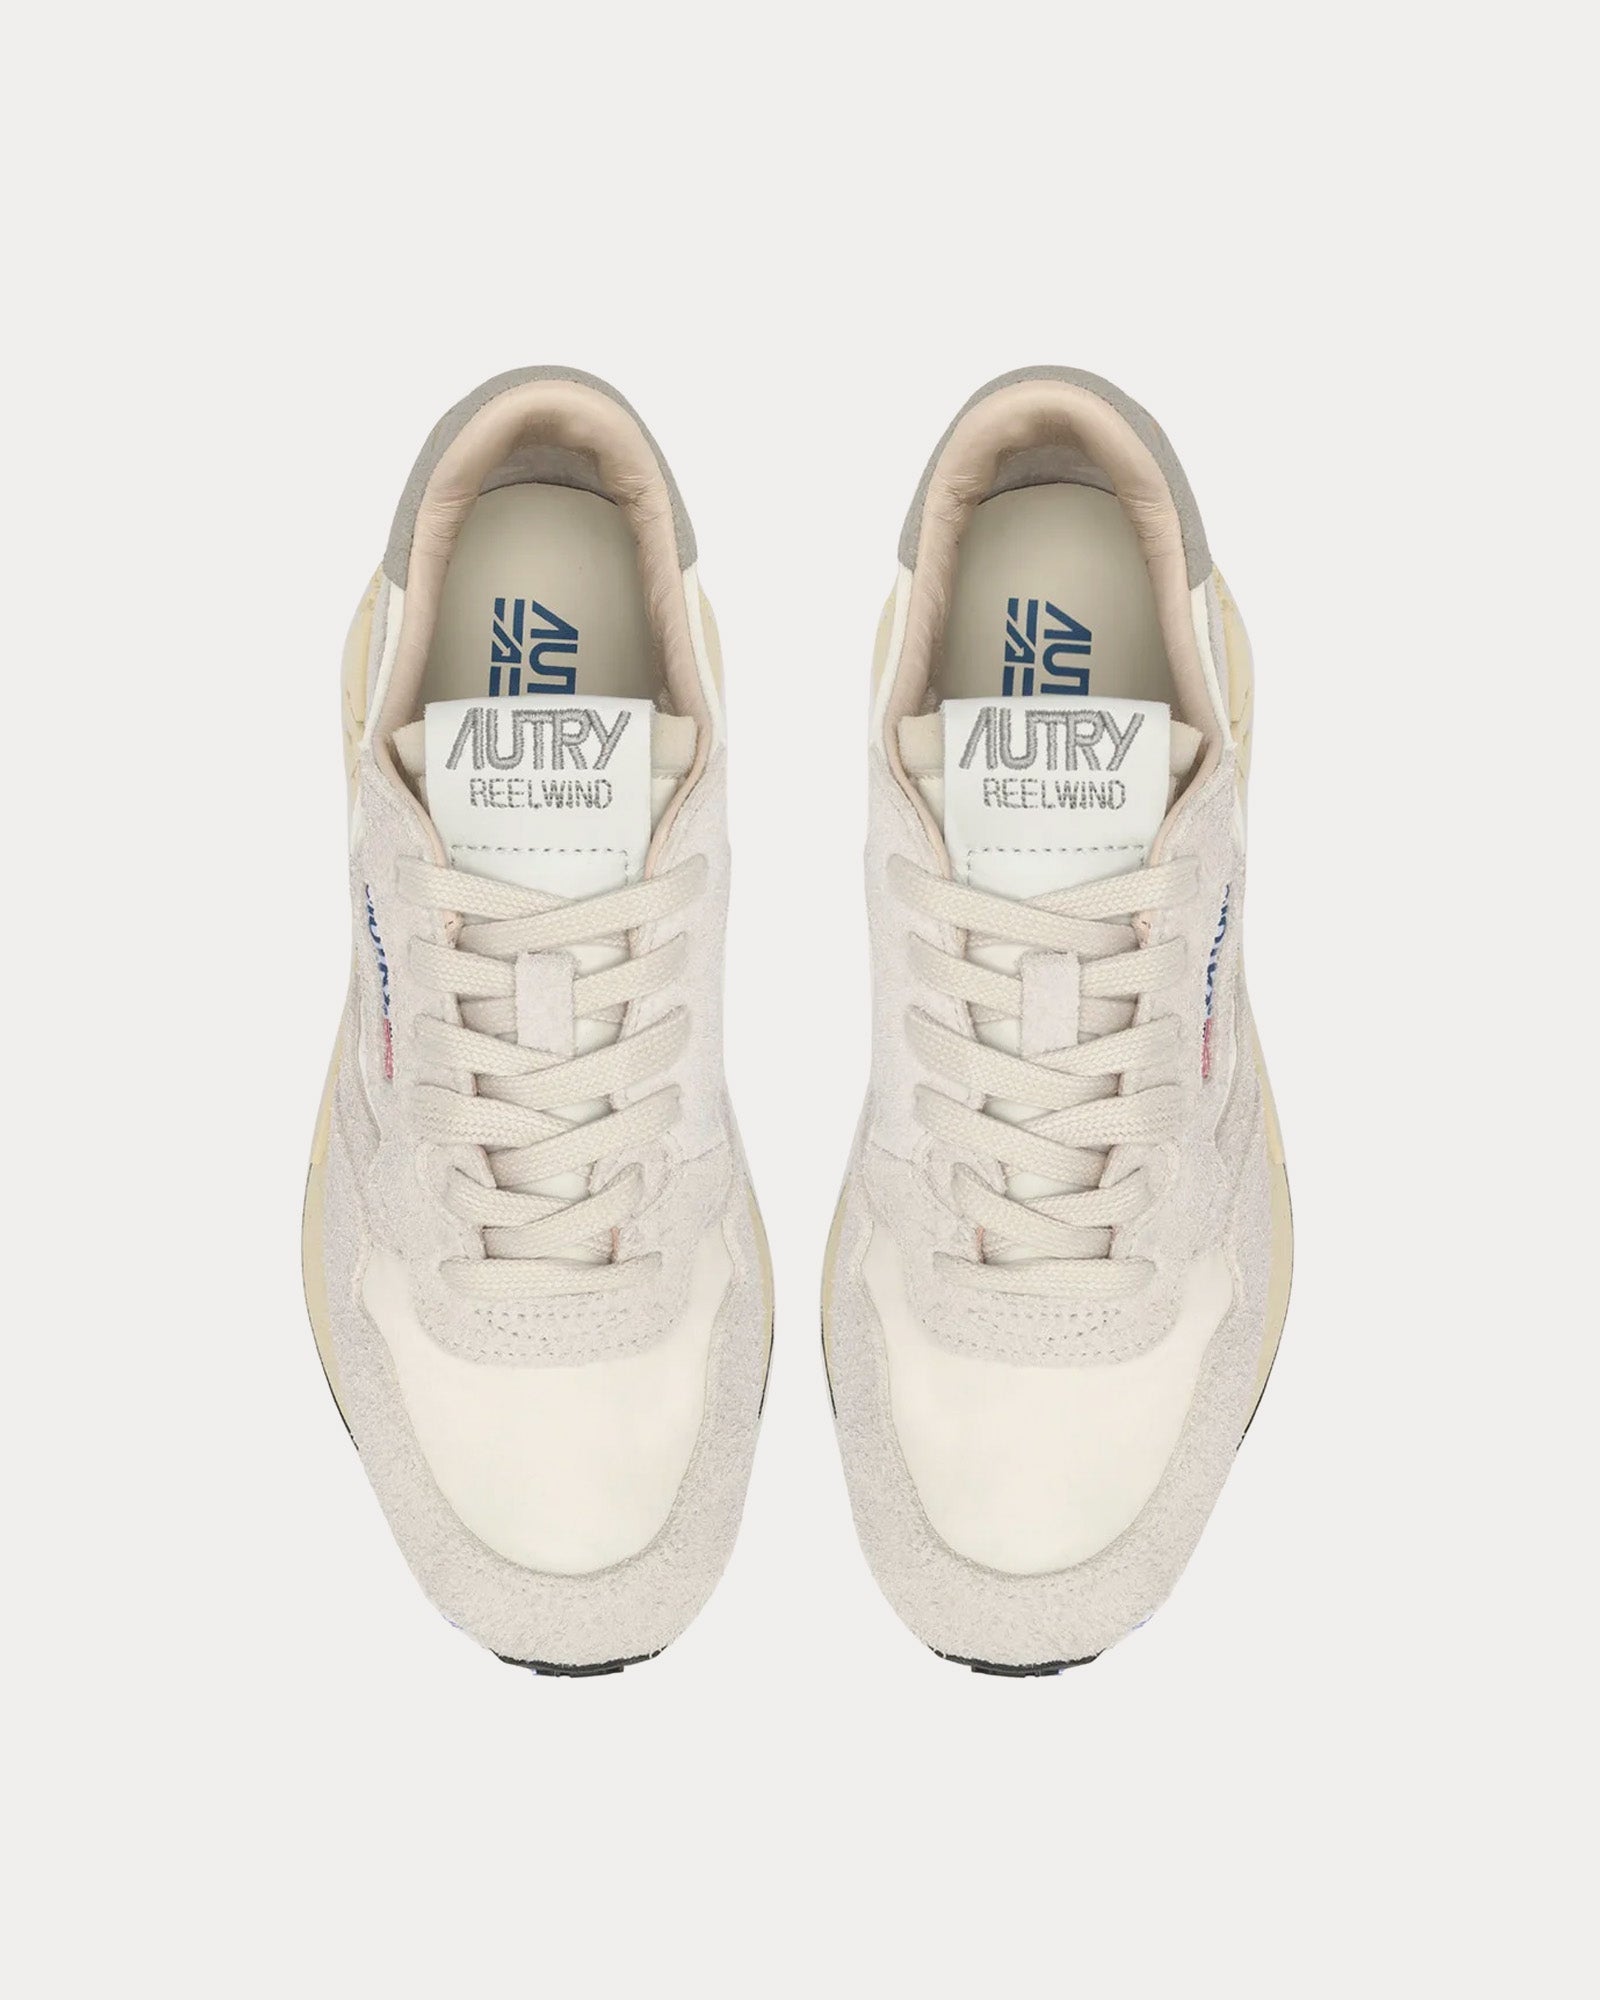 Autry - Reelwind Nylon & Suede White Low Top Sneakers